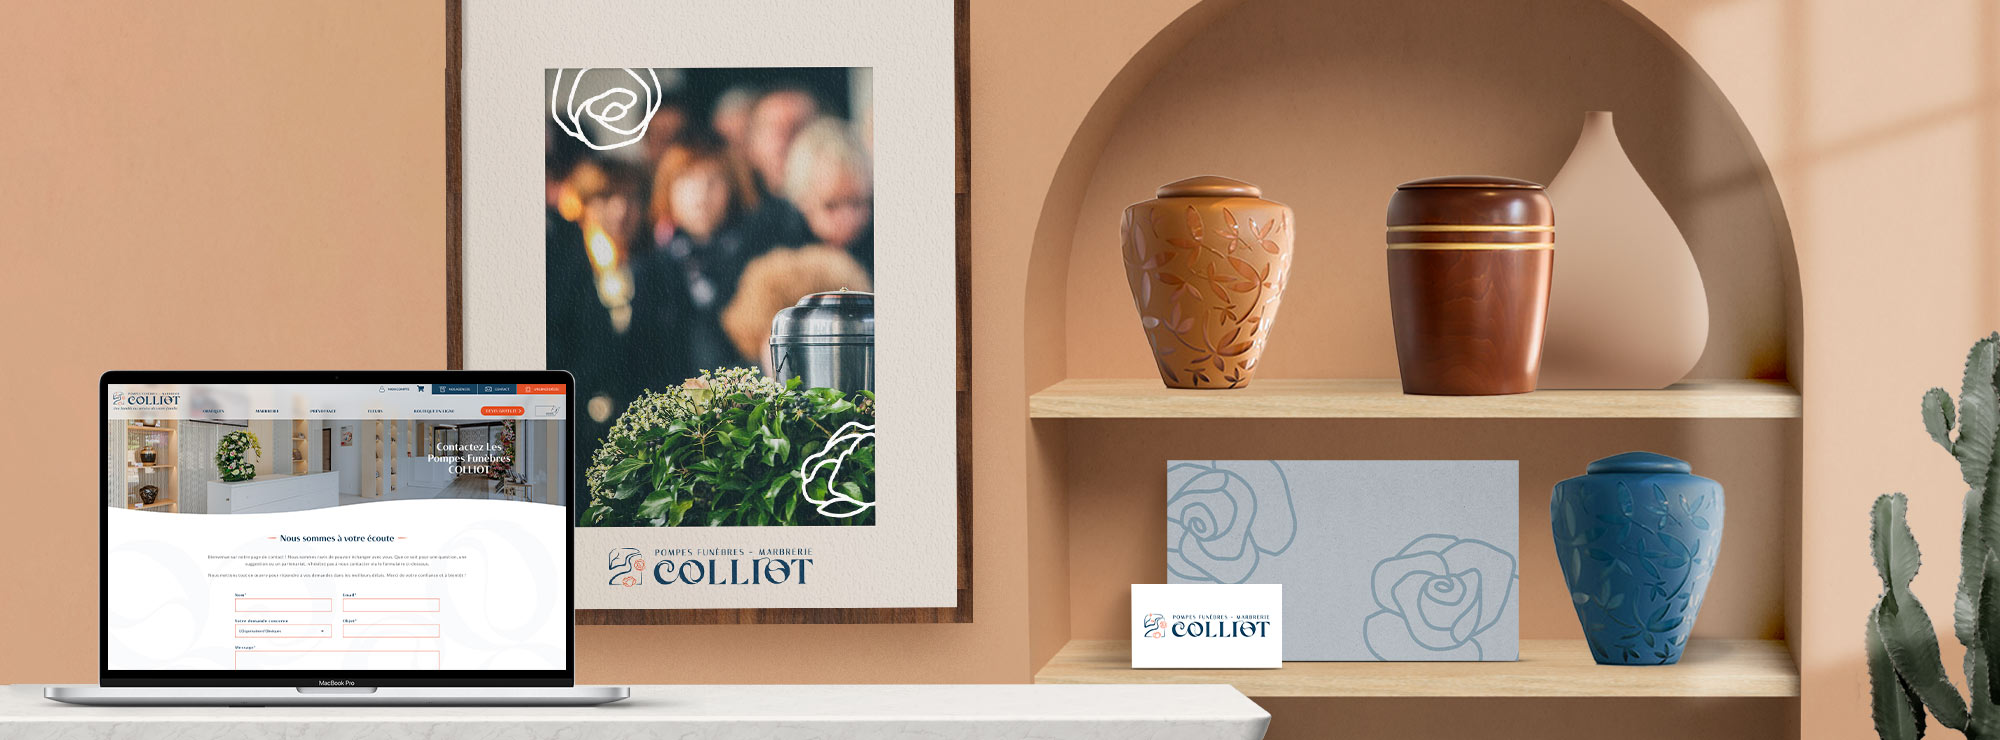 Colliot - a brand engraved in marble